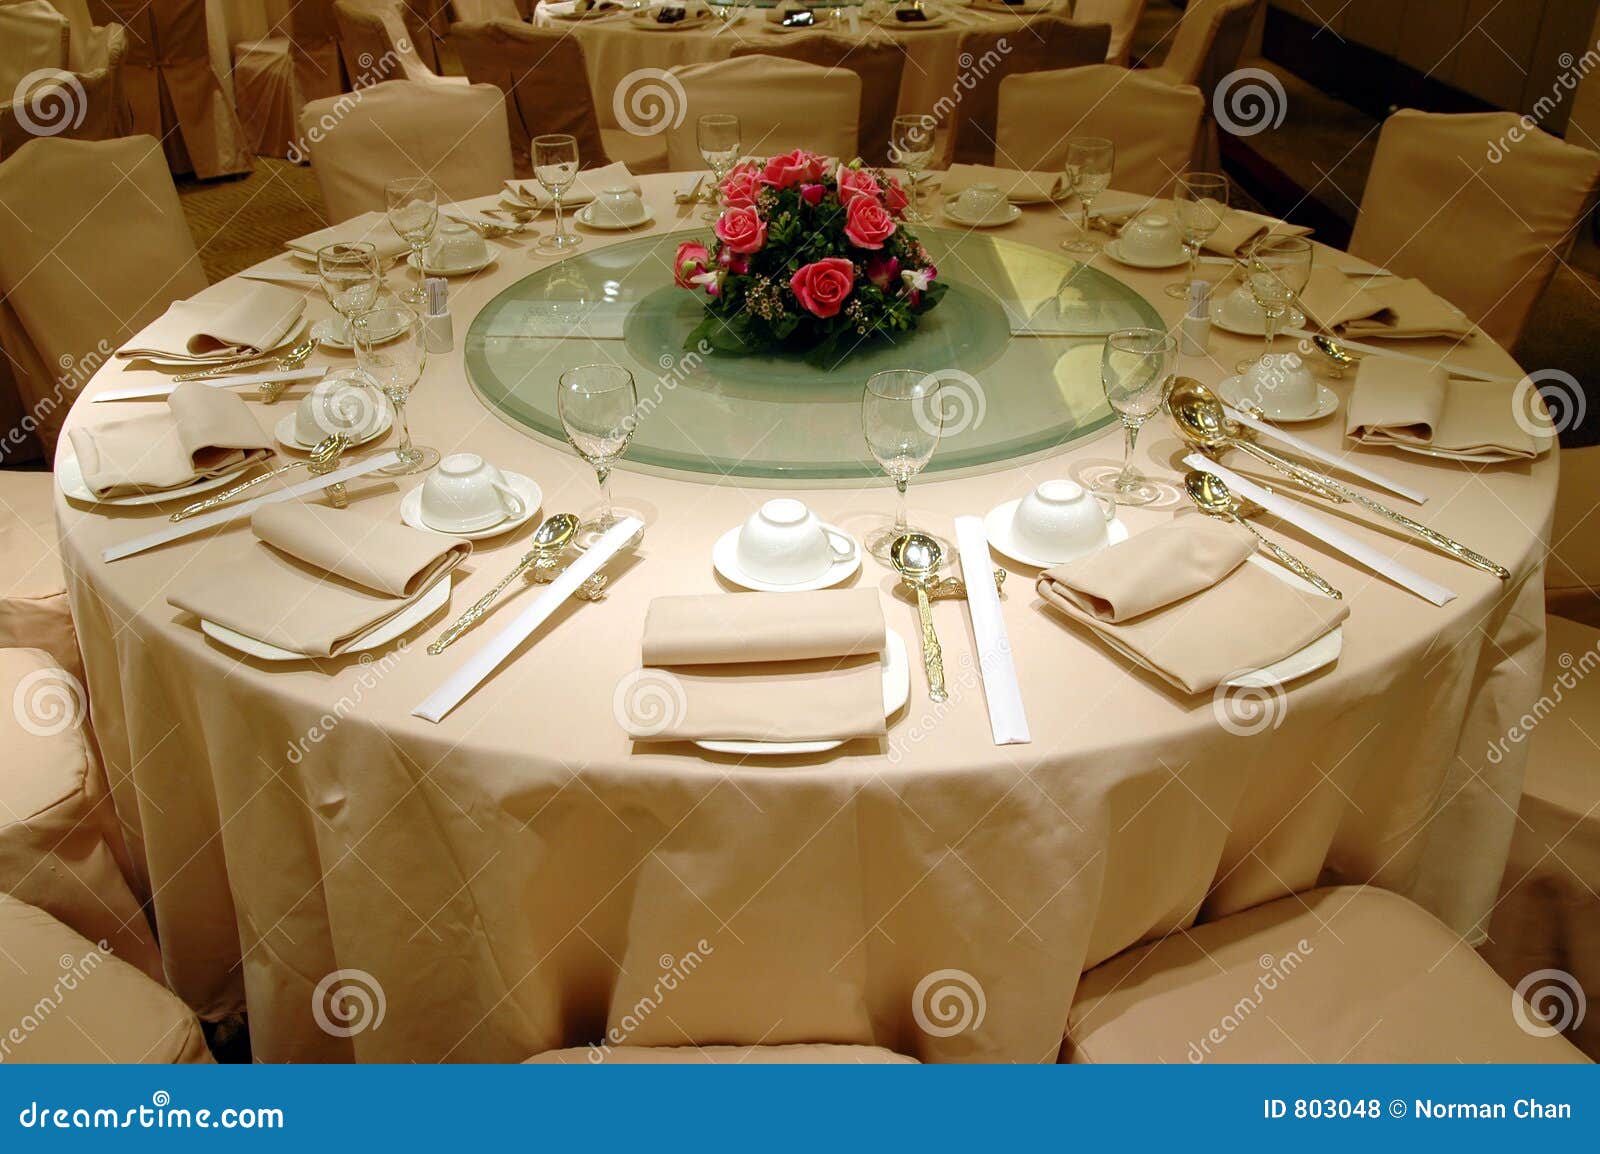 Wedding Banquet Table Setting Stock Photo - Image of ...